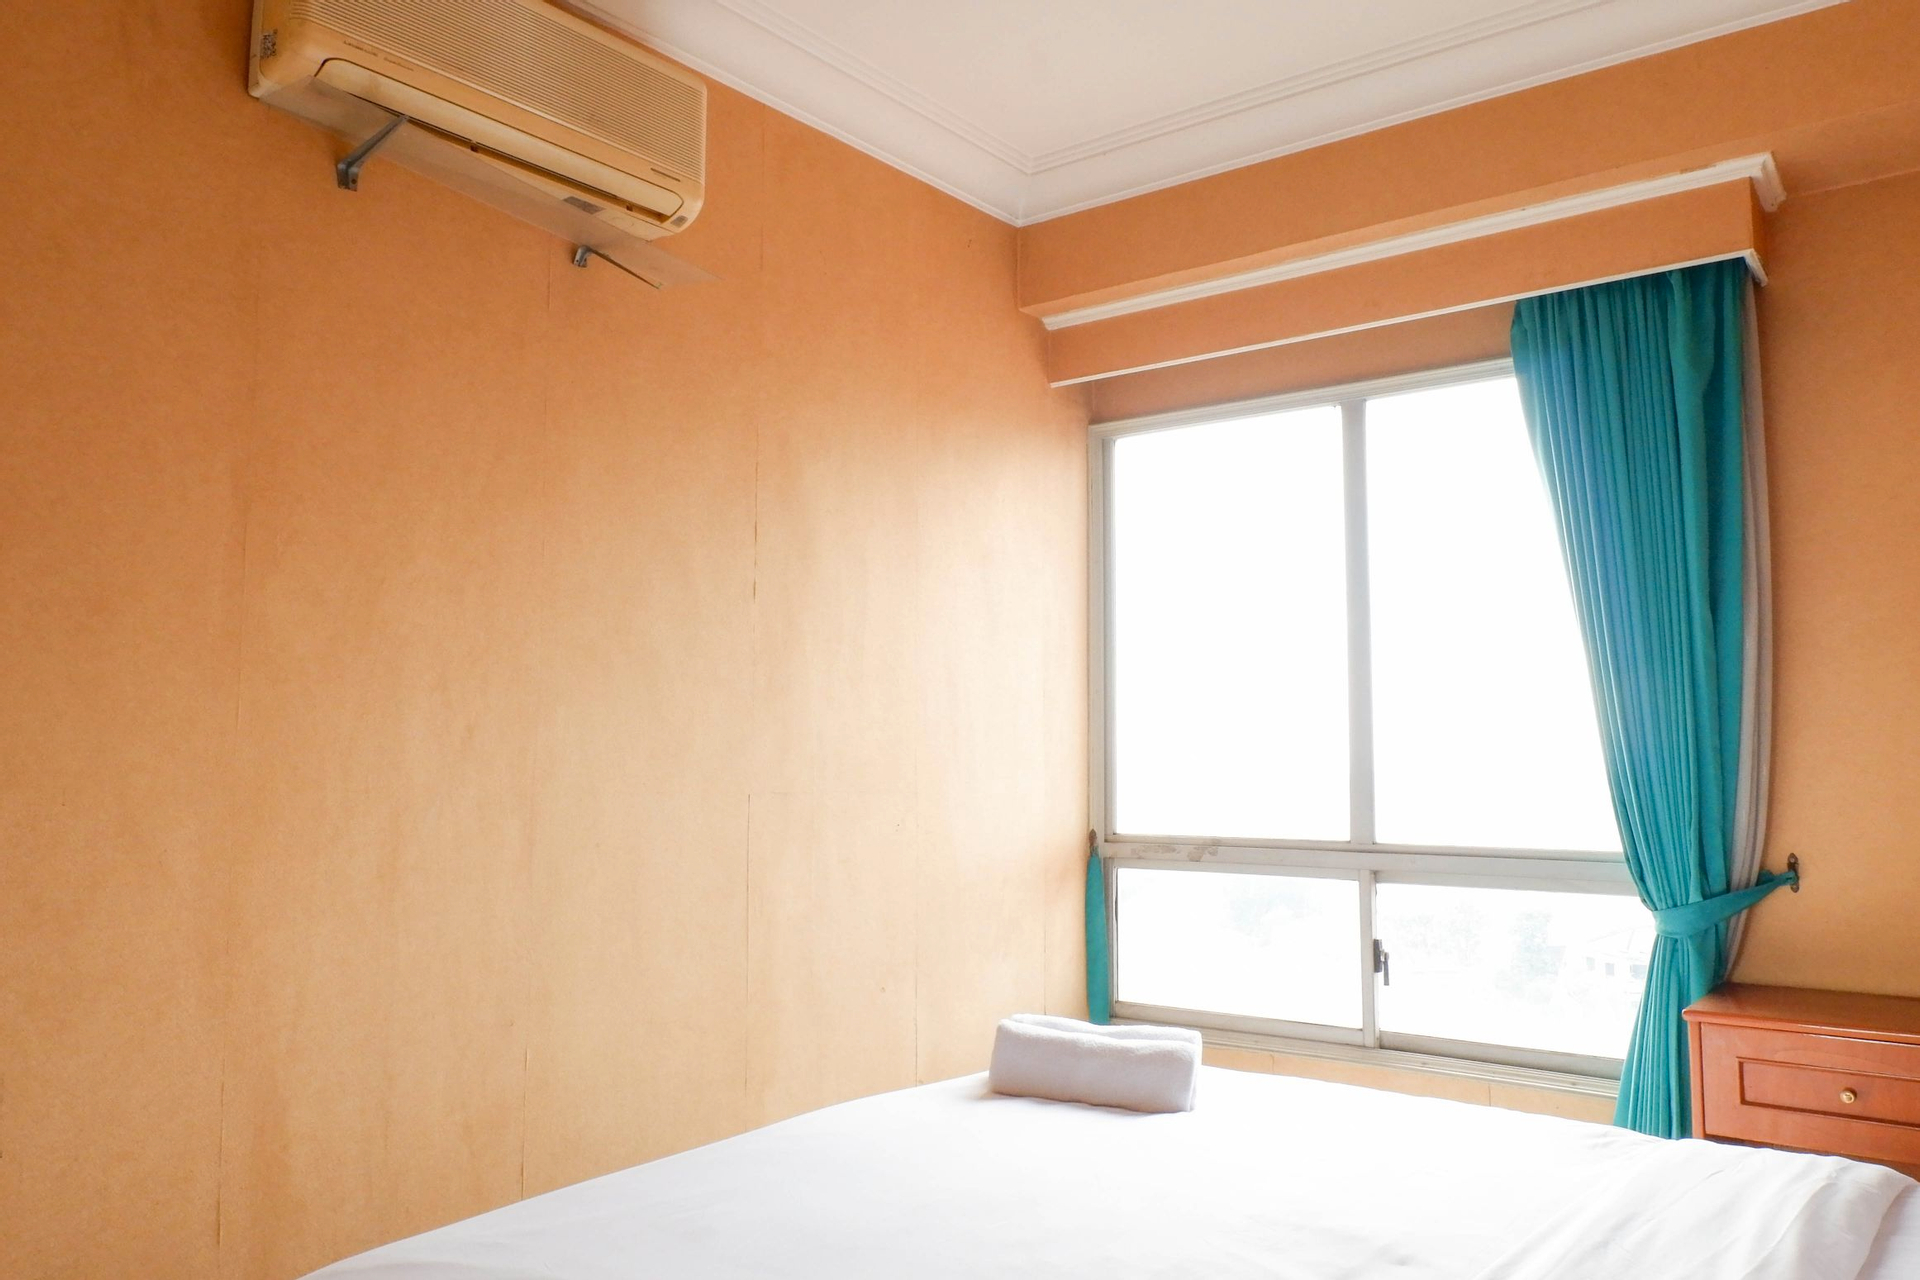 Bedroom 3, Best Deal 2BR Apartment at Taman Beverly By Travelio, Surabaya